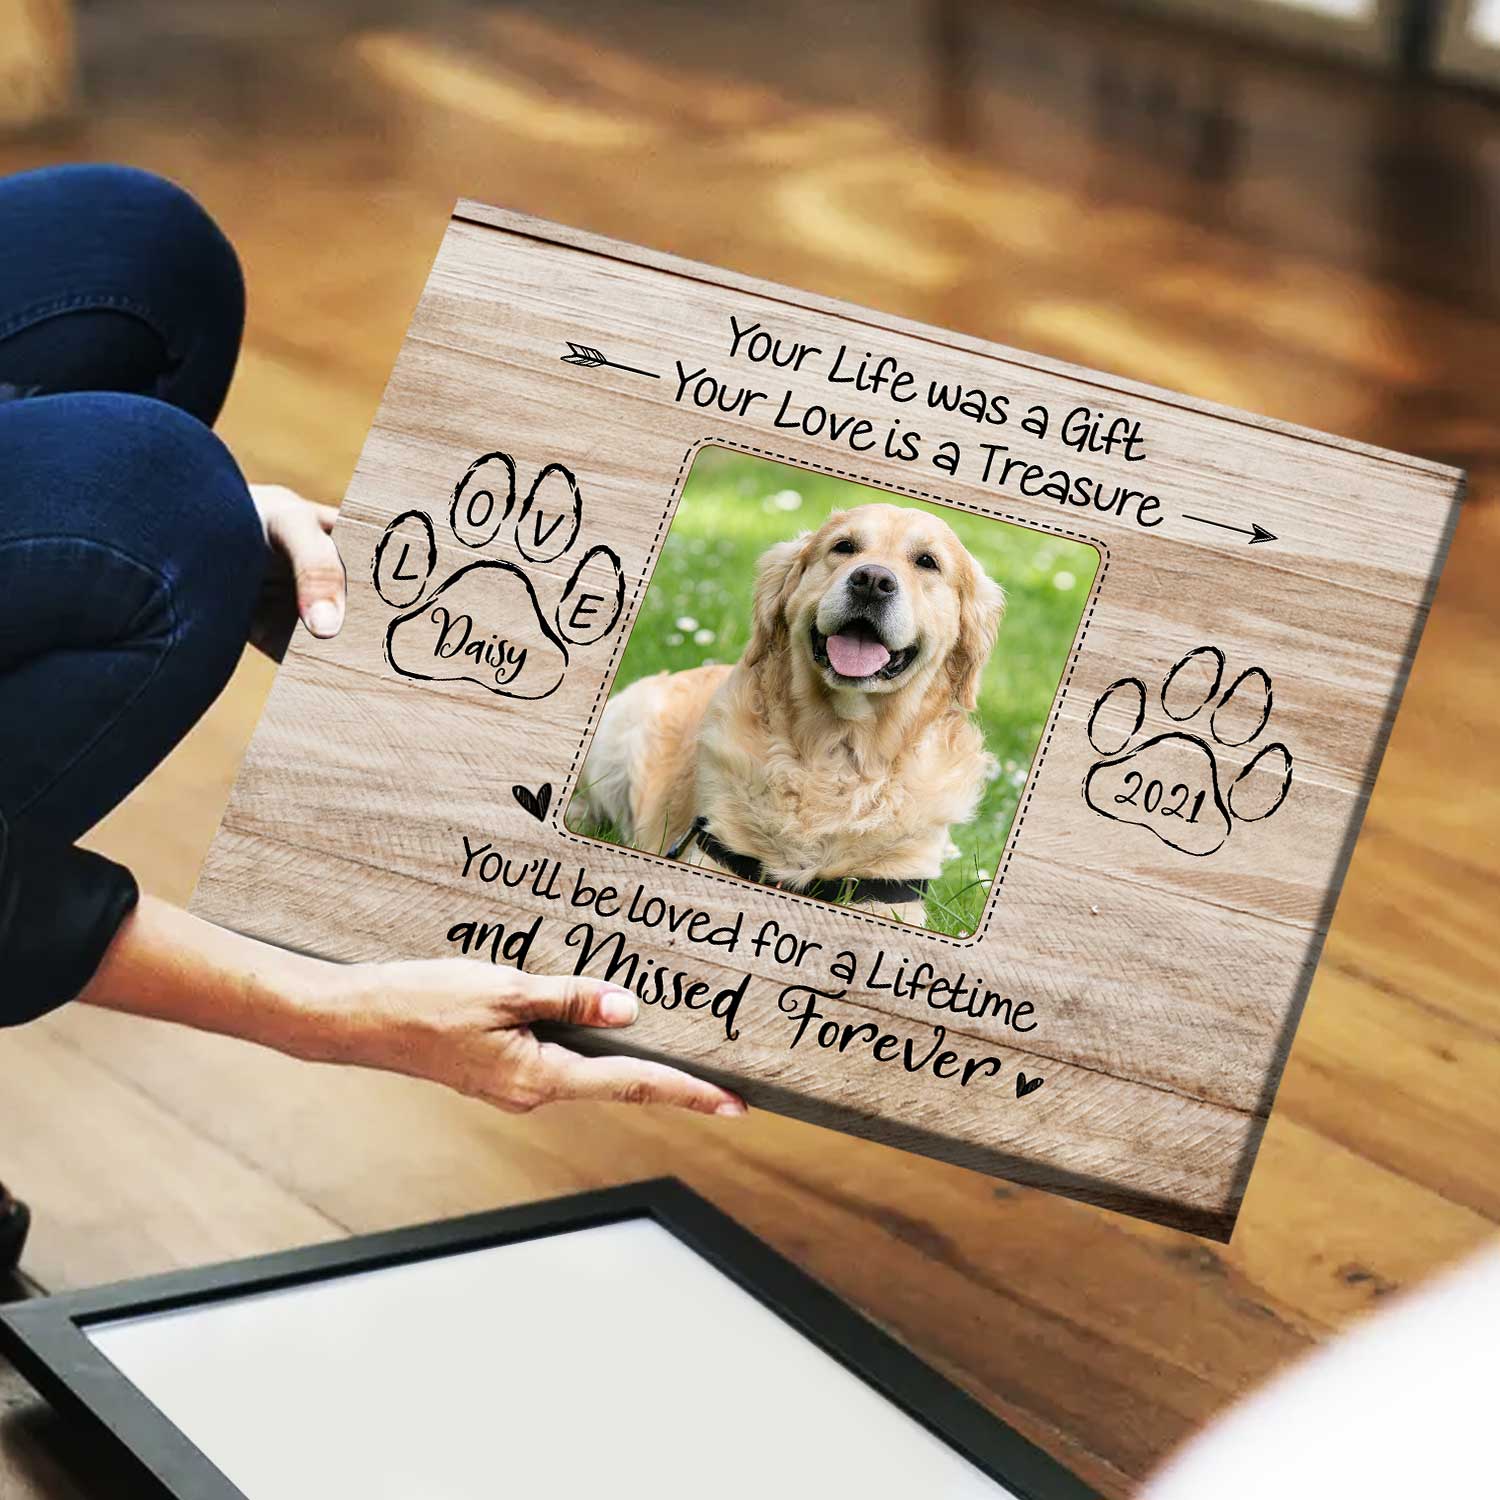 https://benicee.com/wp-content/uploads/2022/10/Personalized-Photo-Pet-Memorial-Gifts-Your-Life-Is-A-Gift-Pet-Remembrance-Gifts-2.jpg